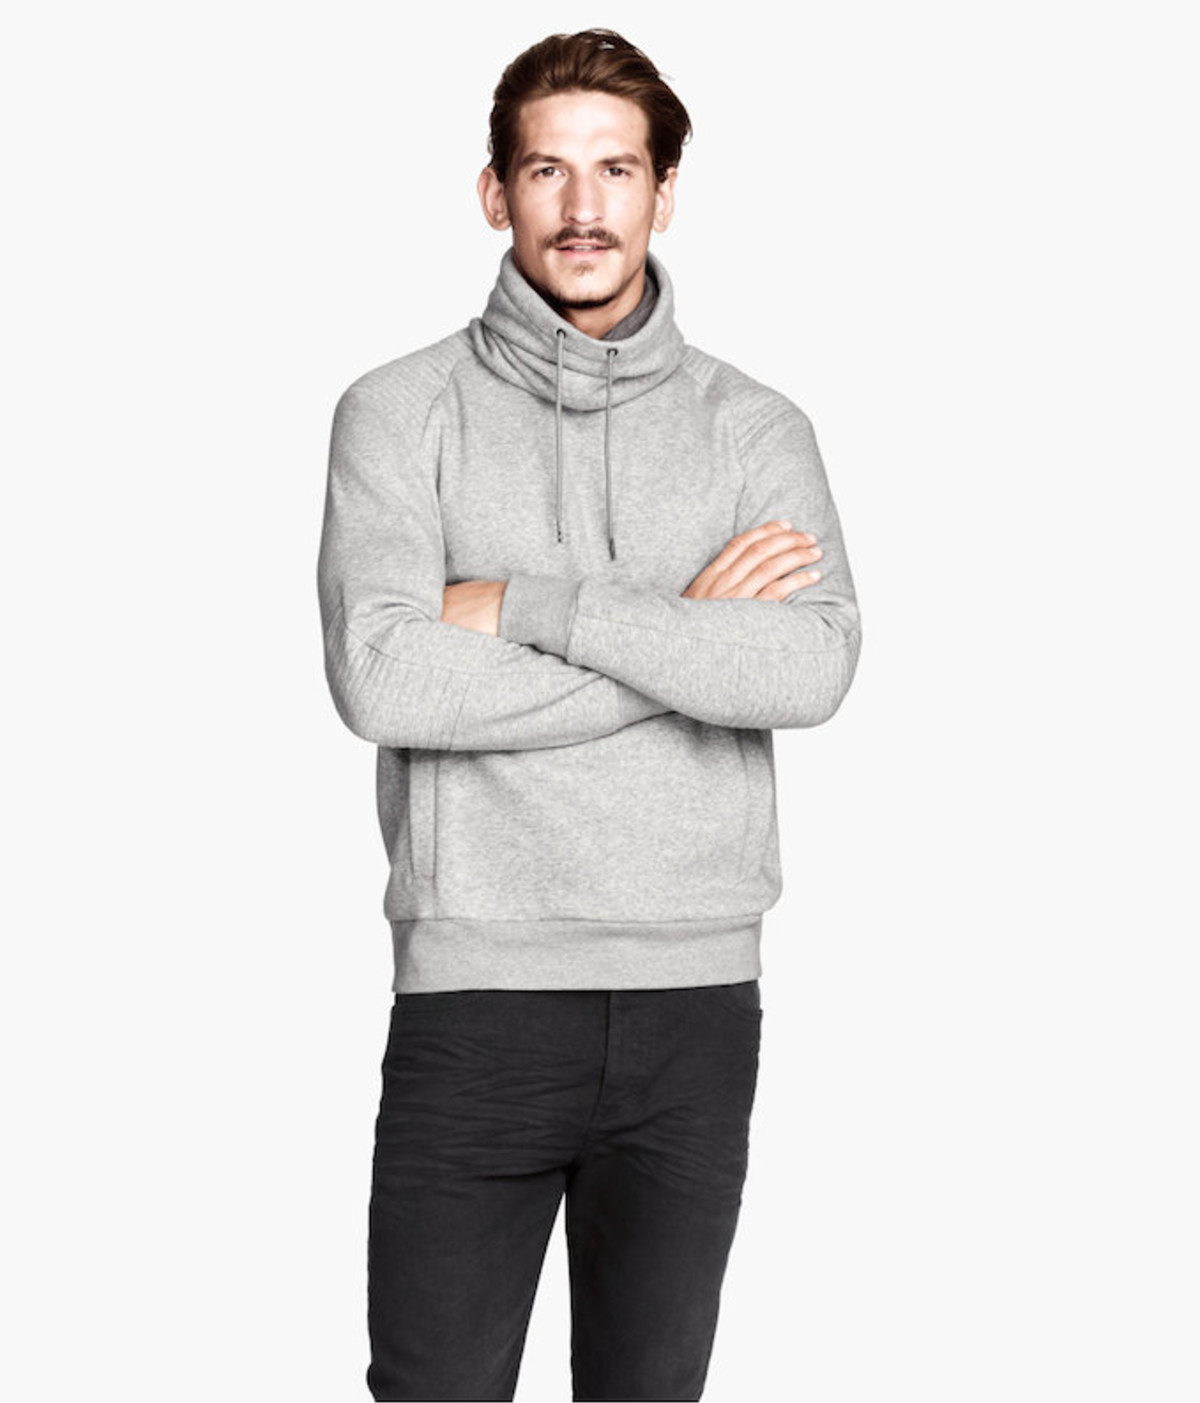 The 20 Best Hoodies Under $100 to Buy Right Now | Complex